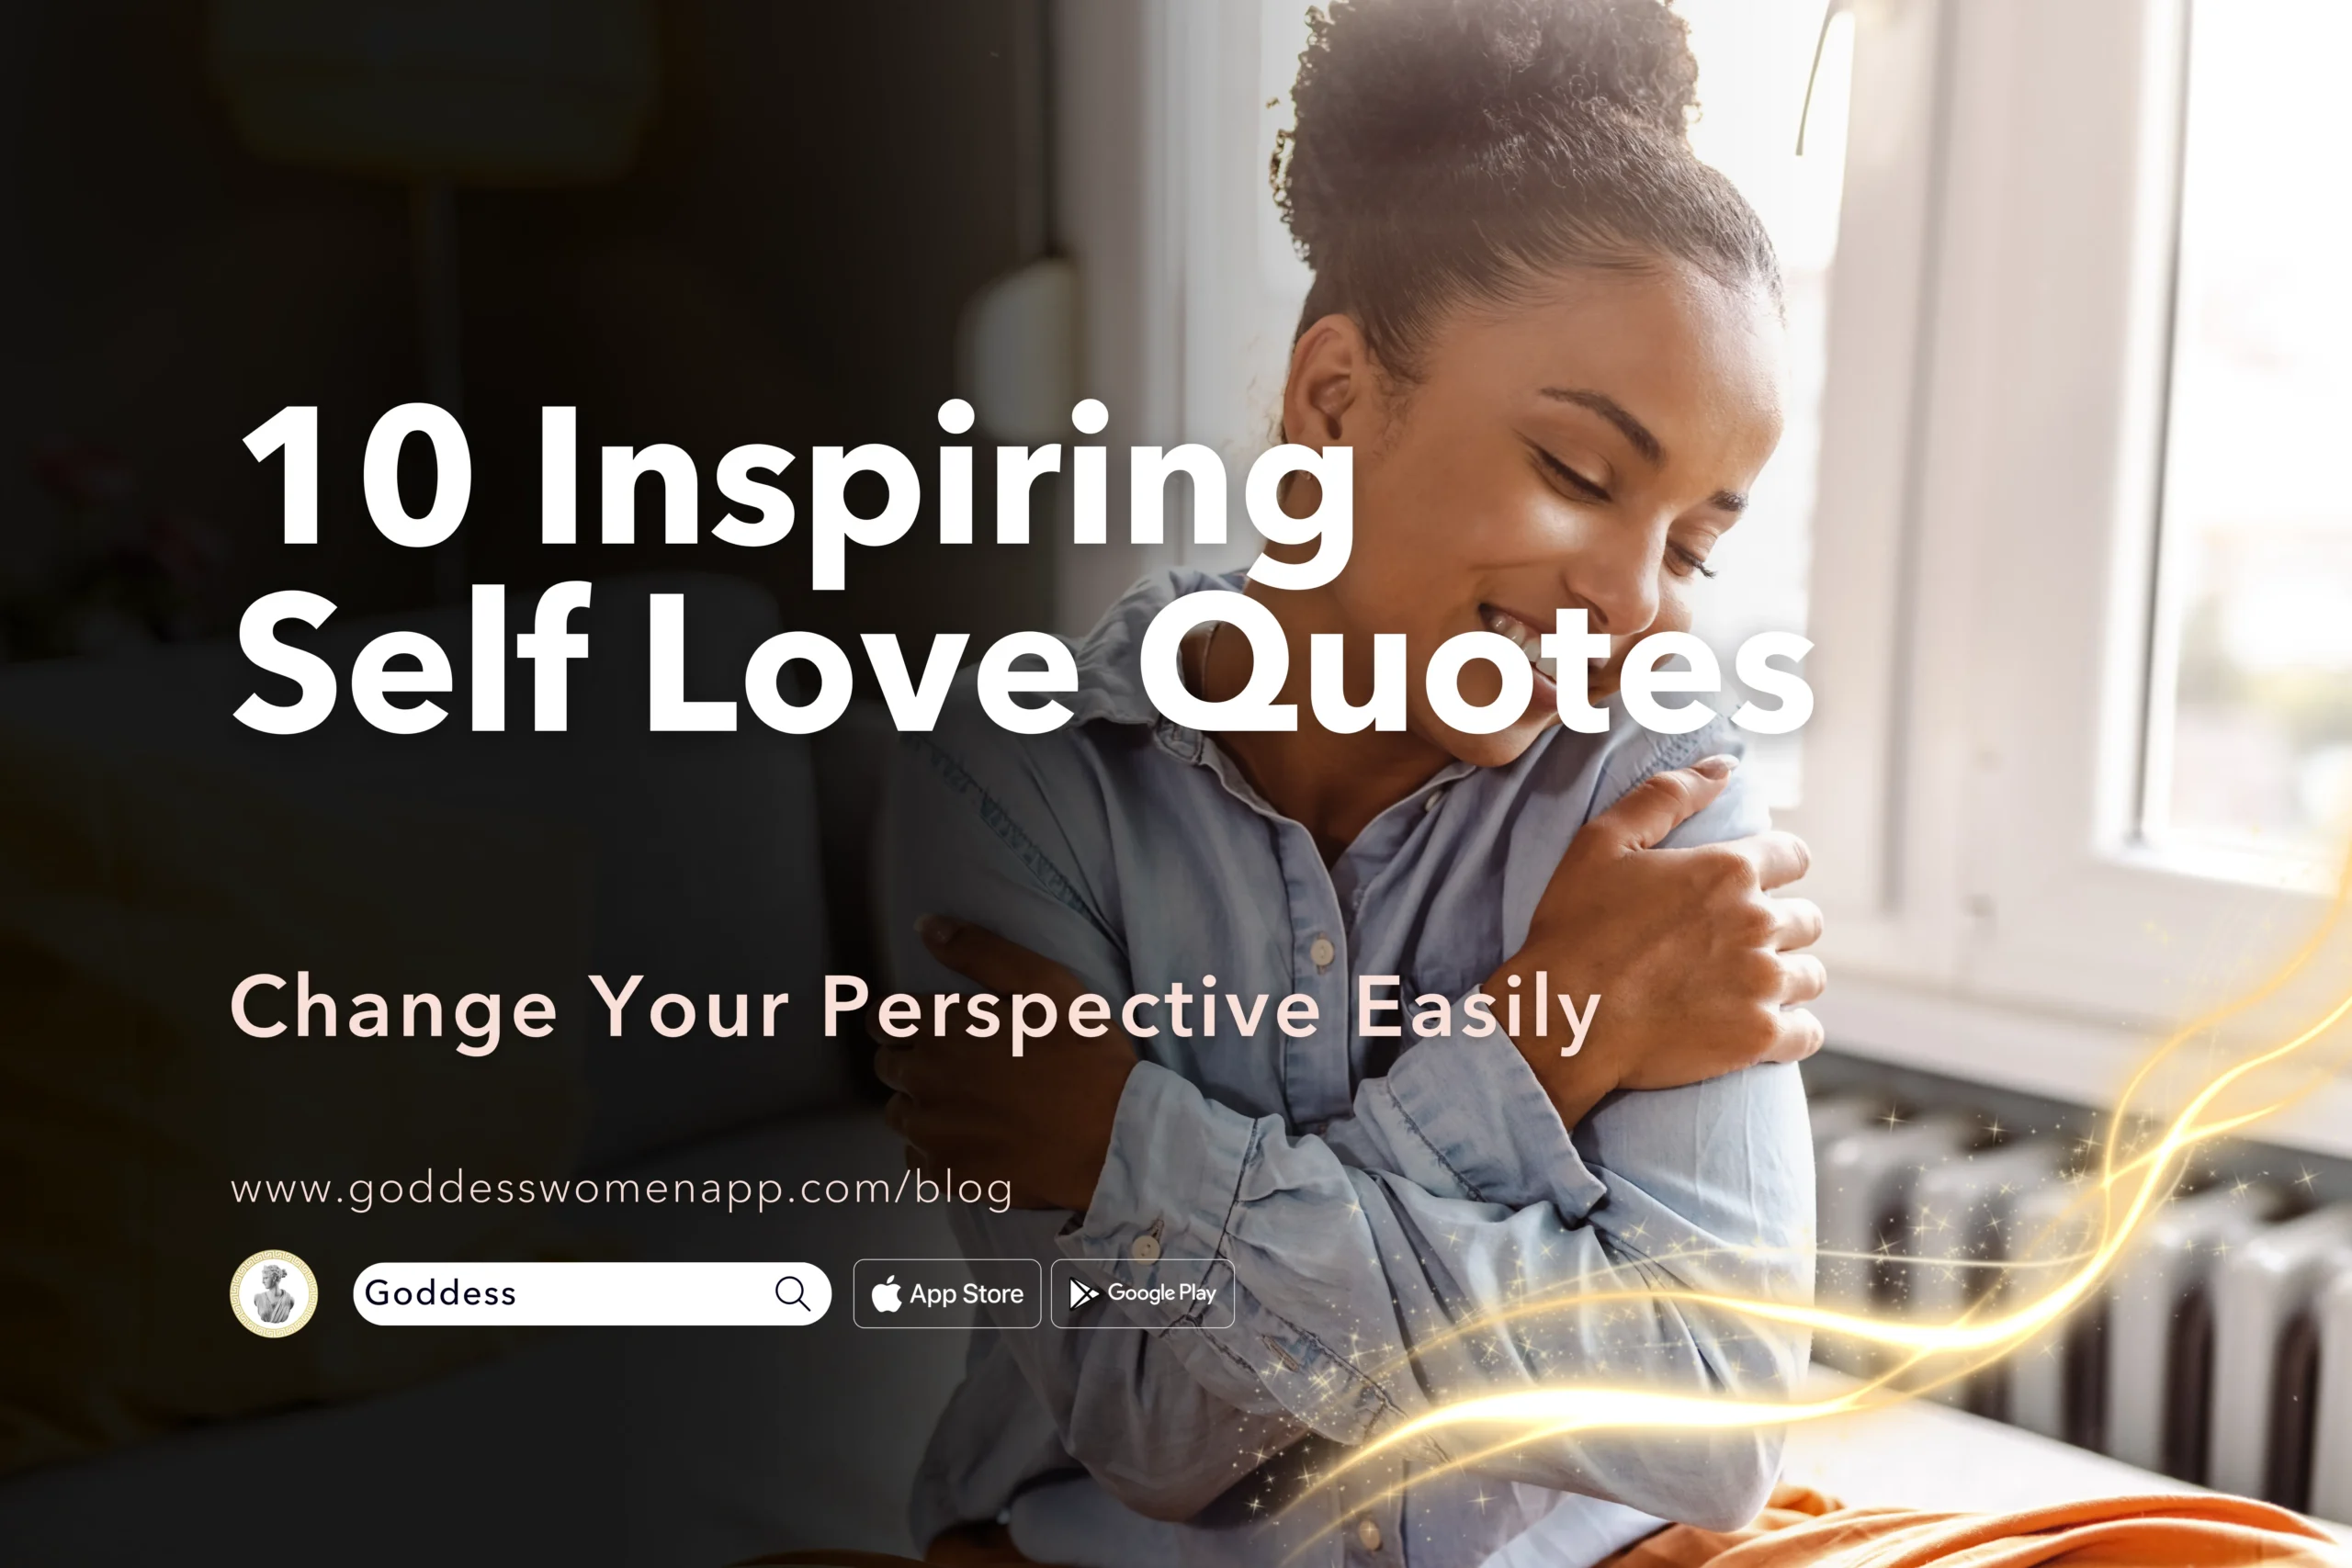 10 Inspiring Self Love Quotes That Will Change Your Perspective